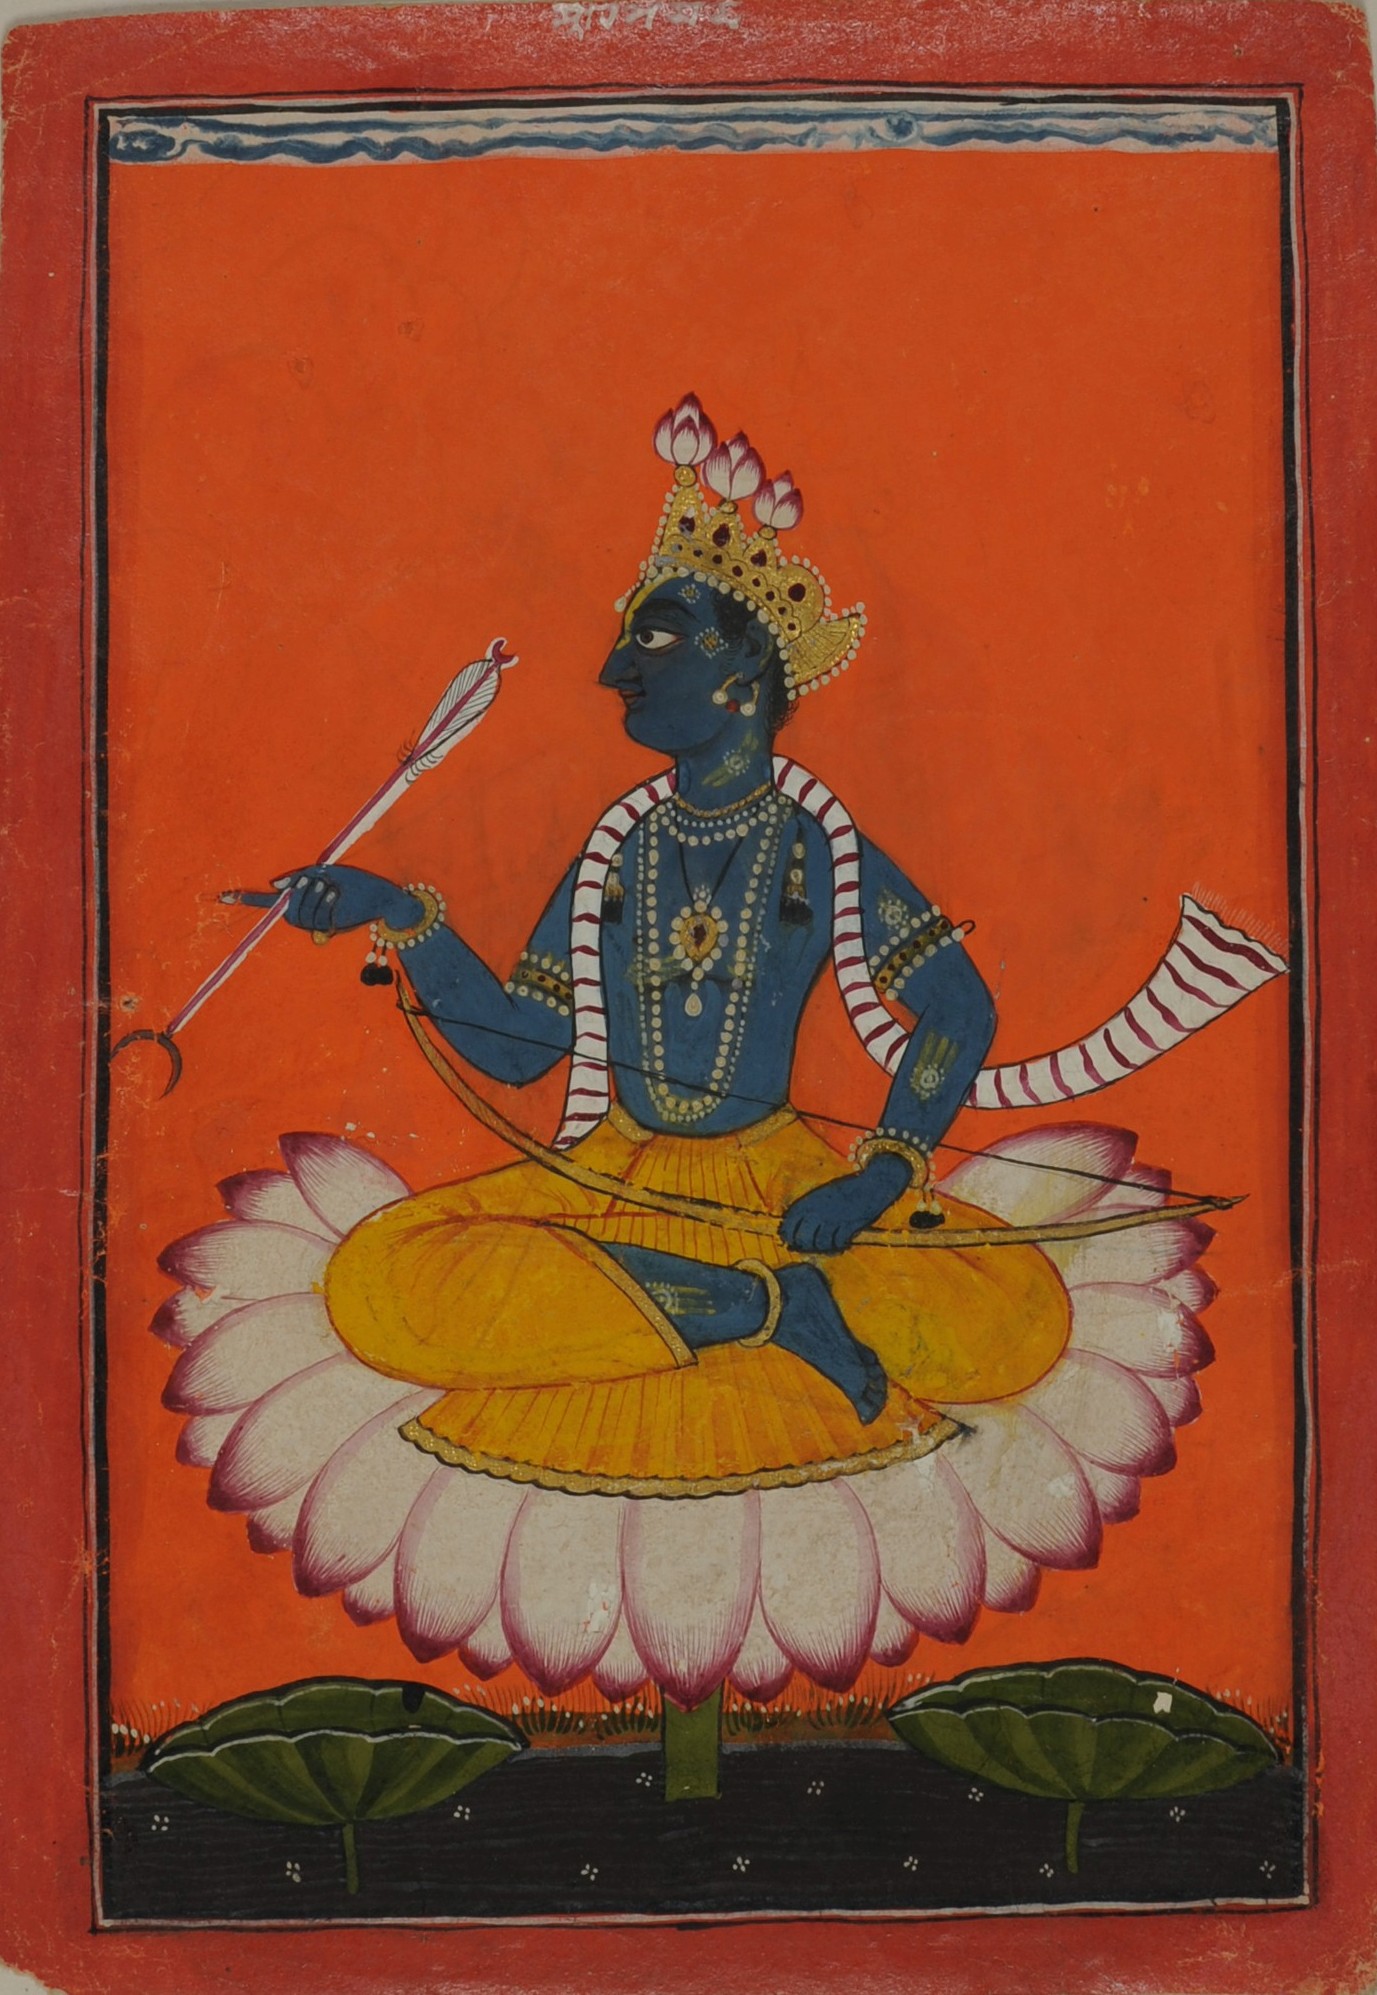 Portrait of Rama (Sri Rama Chandra) by Unknown Artist - Early 18th century - 14.8 x 10.2 cm National Museum of New Delhi, India